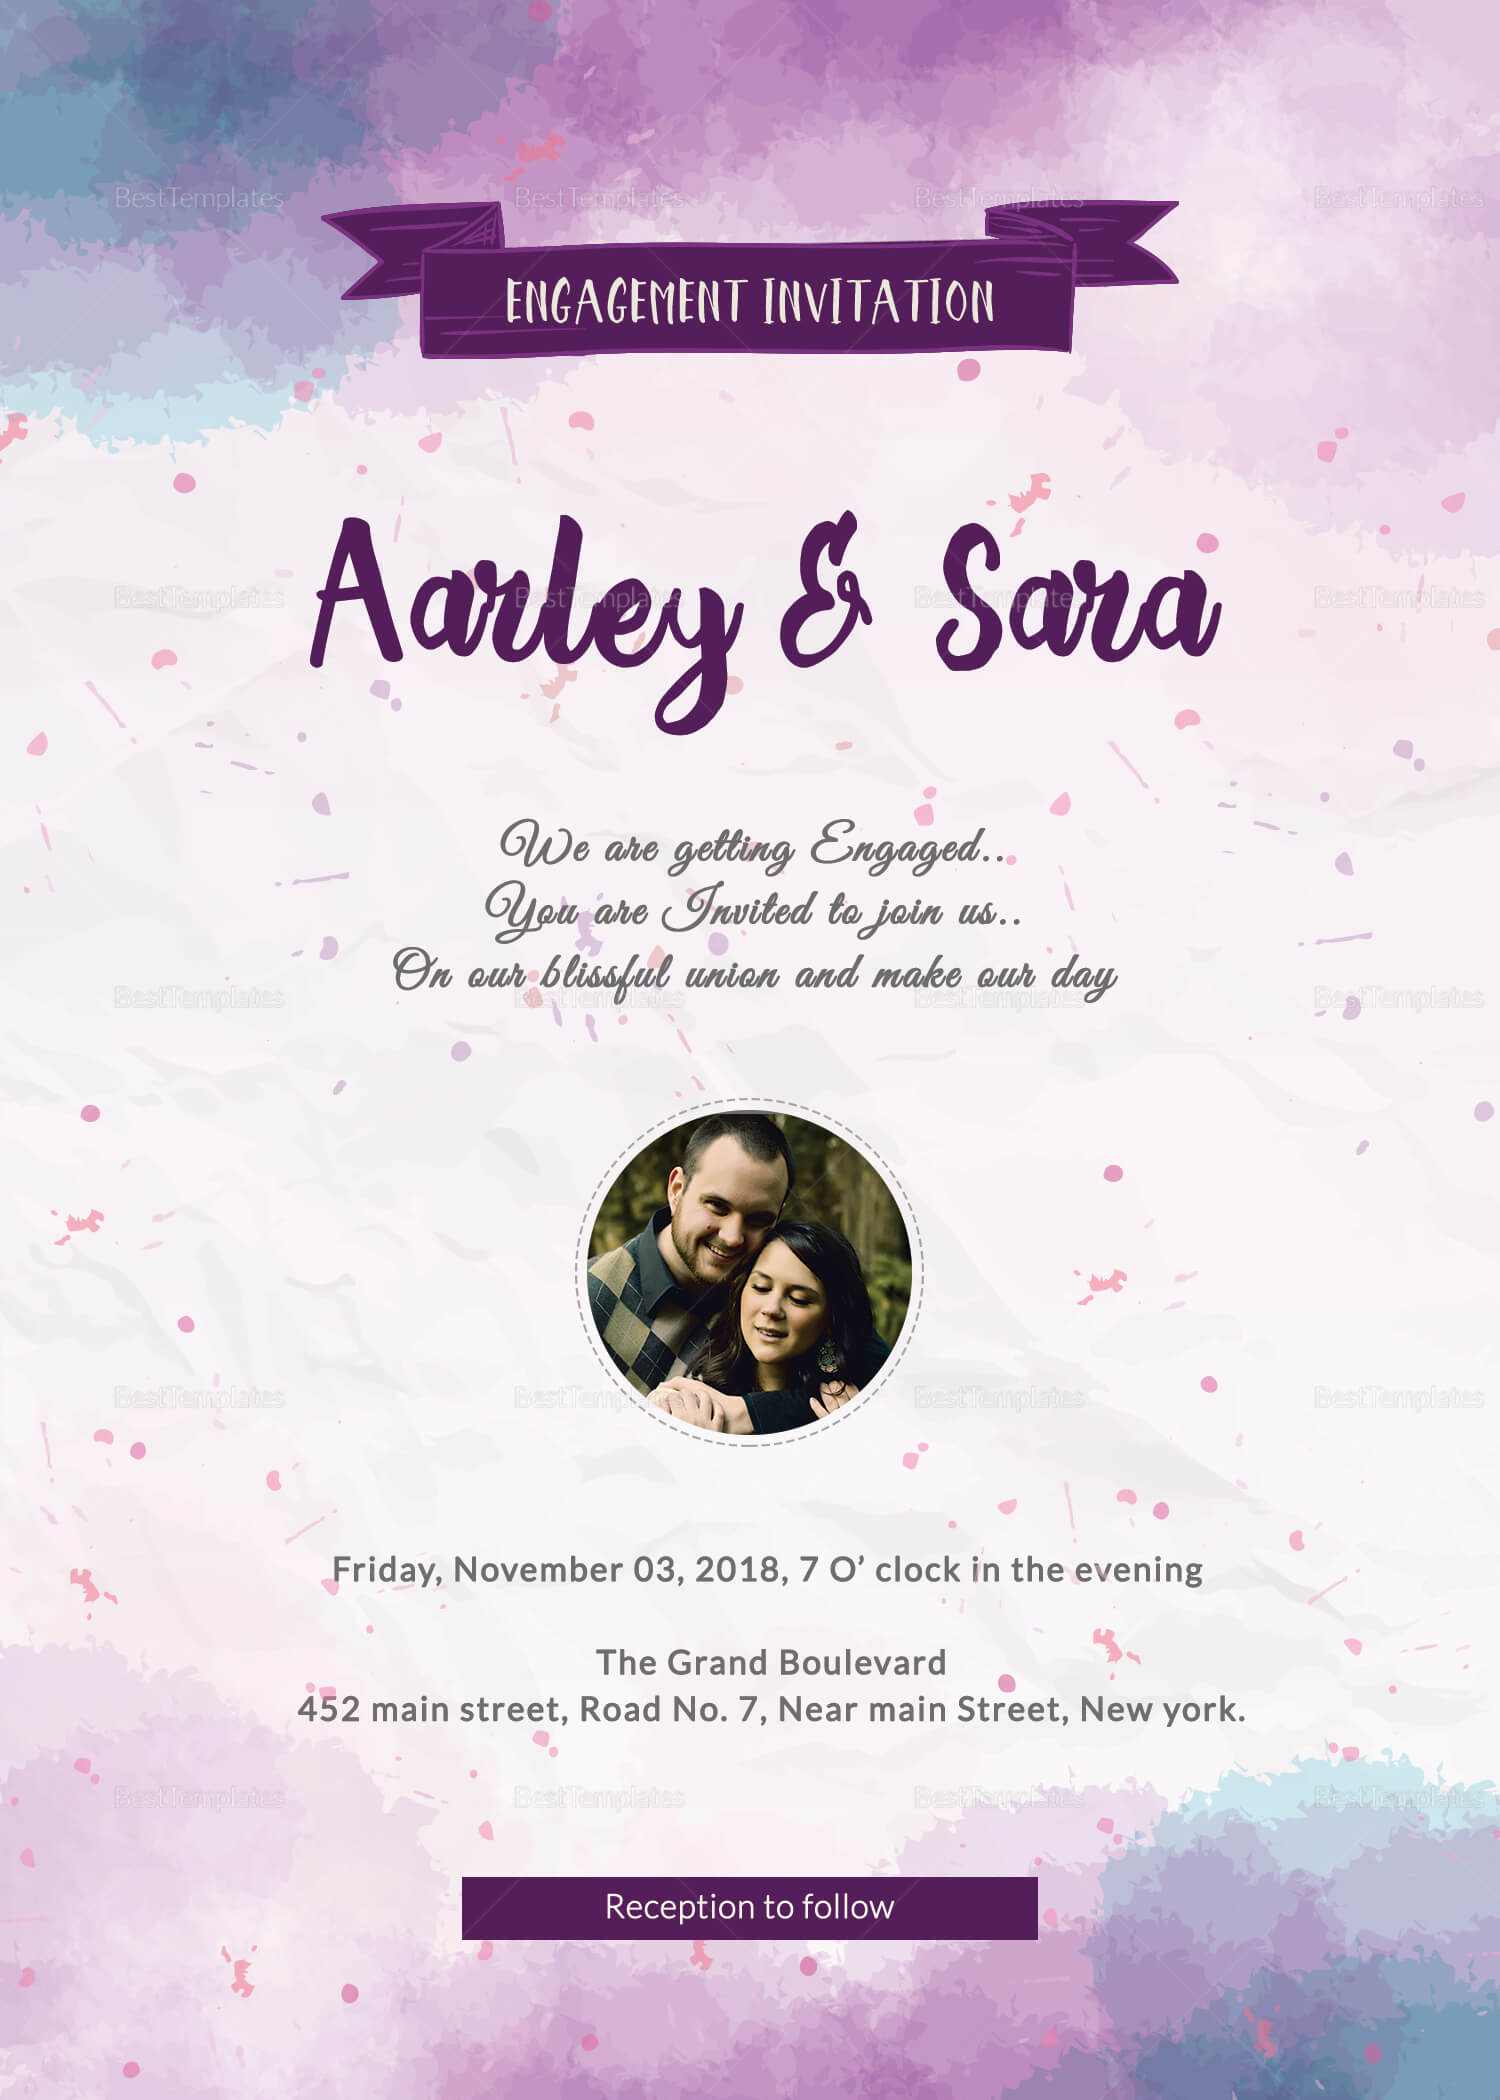 Engagement Party Invitation Card Template With Engagement Invitation Card Template